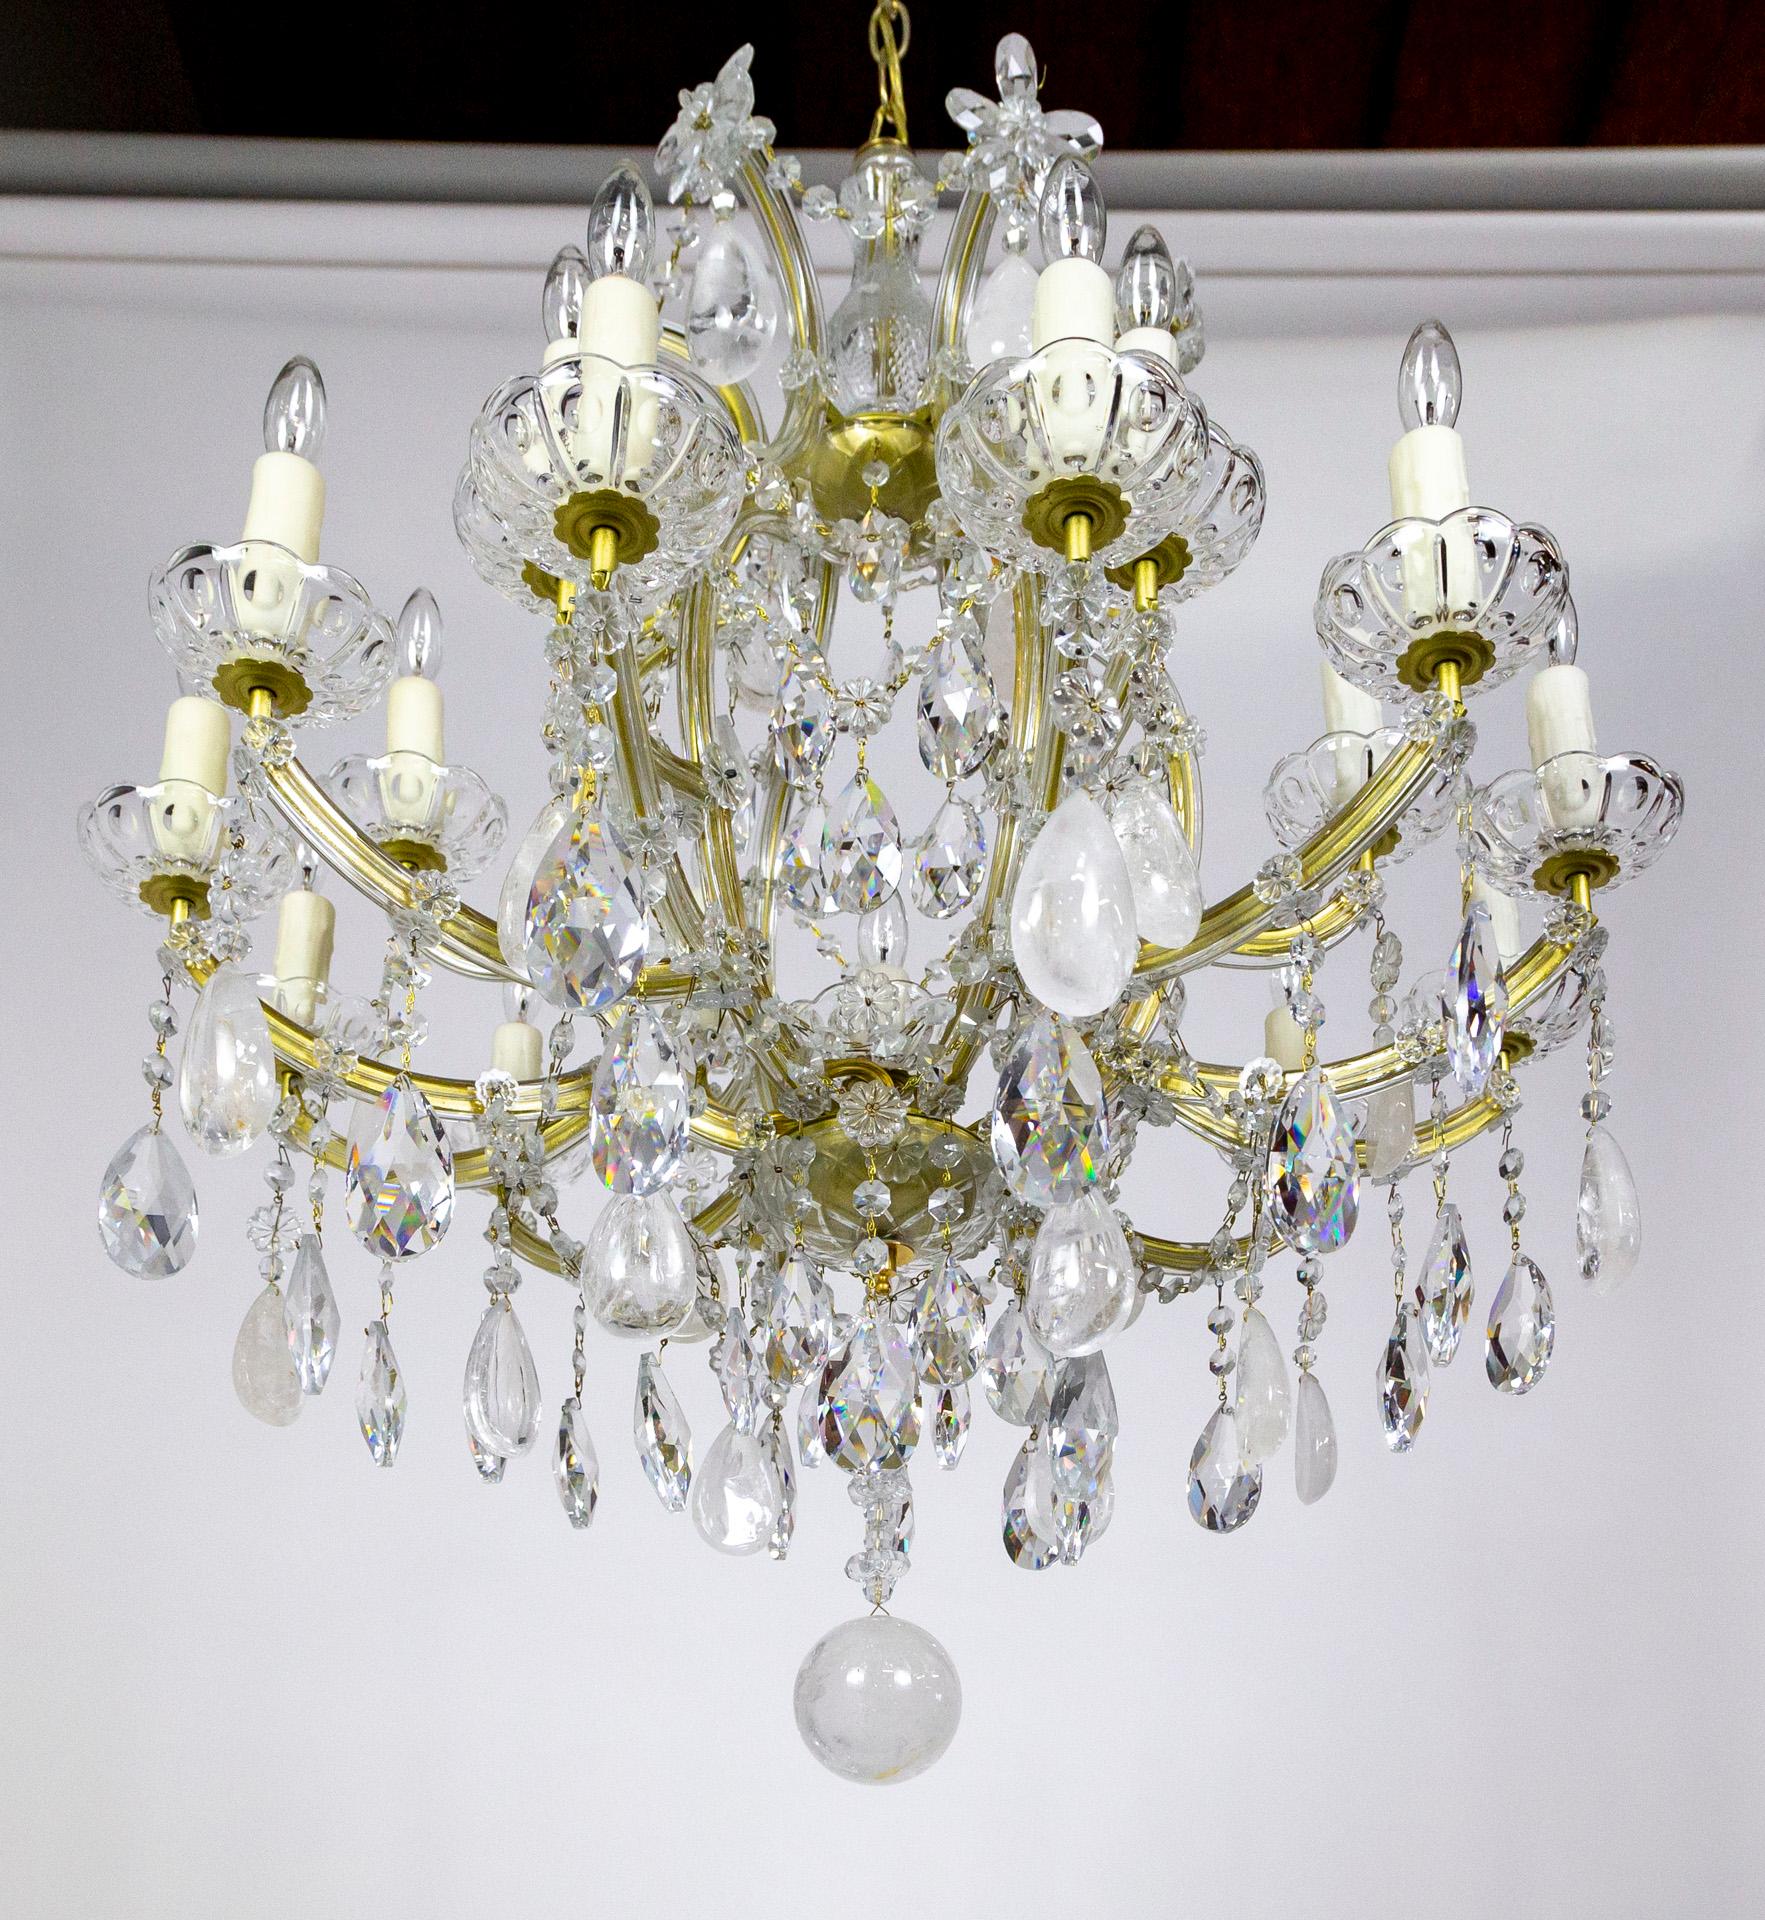 20th Century 19-Light Rock Crystal Maria Theresa Chandelier For Sale